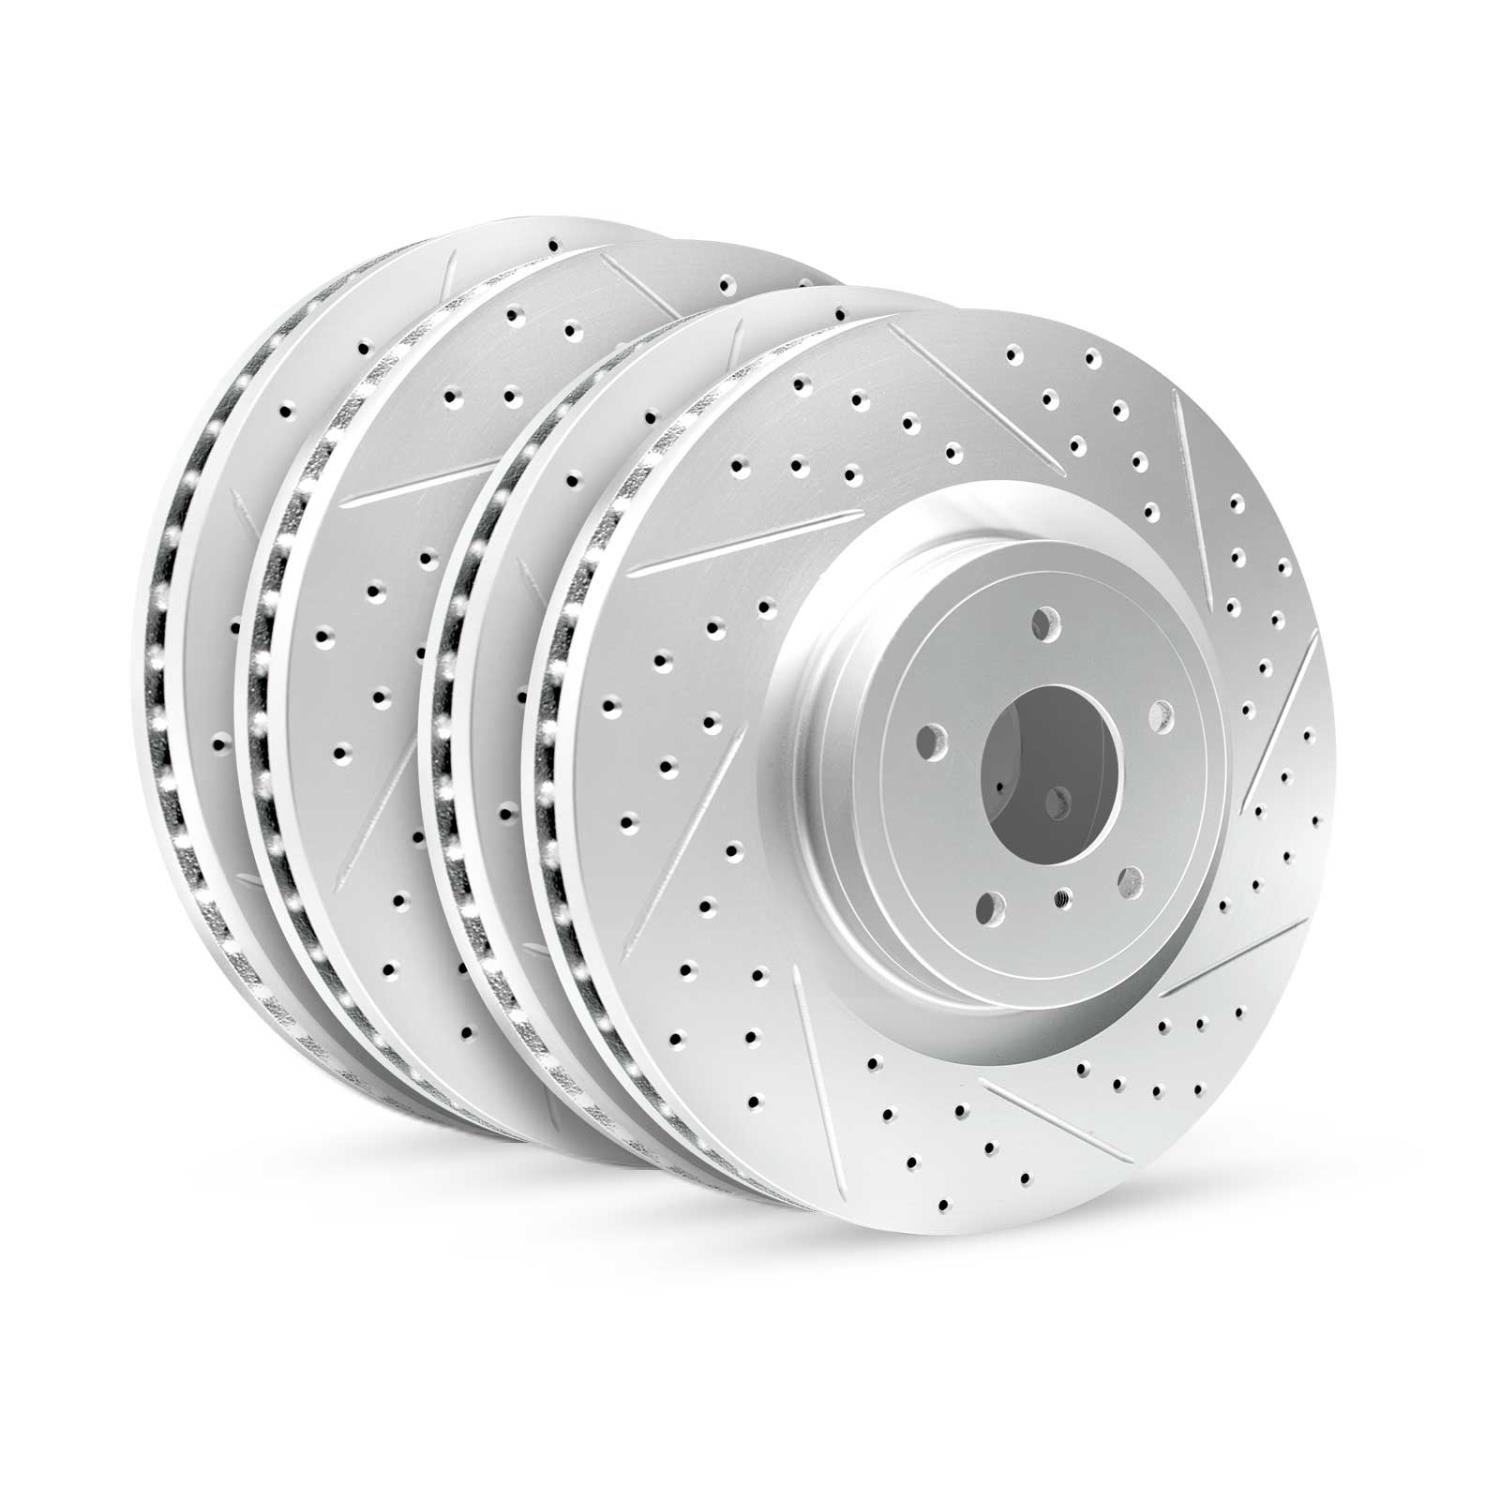 GEO-Carbon Drilled/Slotted Rotors, 2003-2004 Infiniti/Nissan, Position: Front/Rear